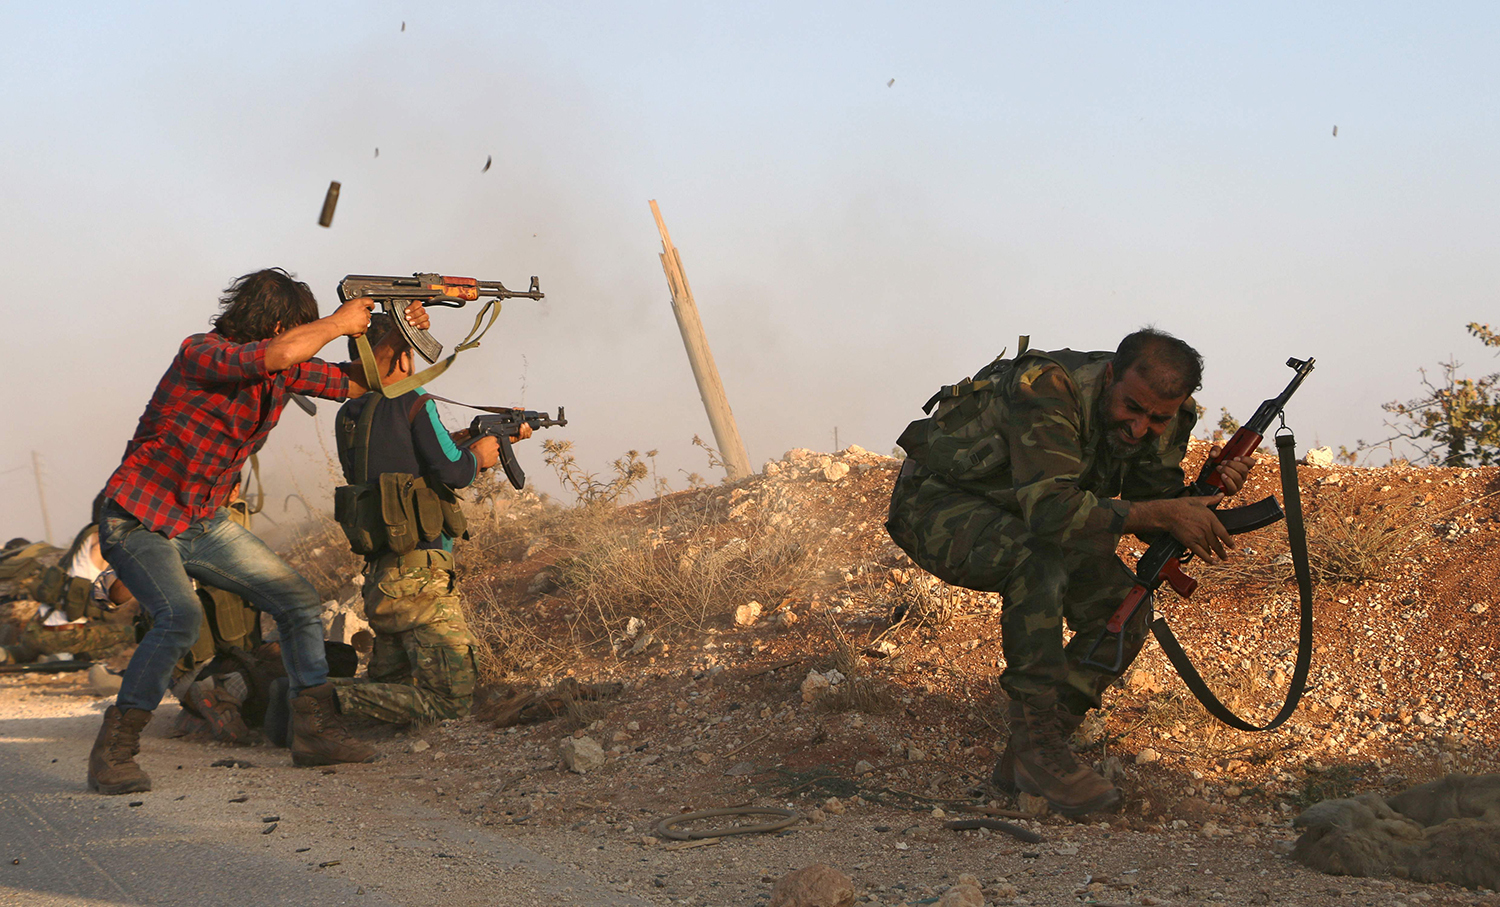 TOPSHOT - Fighters from the Free Syrian Army take part in a battle against the Islamic State (IS) group jihadists in the northern Syrian village of Yahmoul in the Marj Dabiq area north of the embattled city of Aleppo on October 10, 2016. Syria's main opposition group called for foreign allies to supply rebel forces with ground-to-air weapons to counter deadly air raids in Aleppo. / AFP PHOTO / Nazeer al-Khatib / TT / kod 444